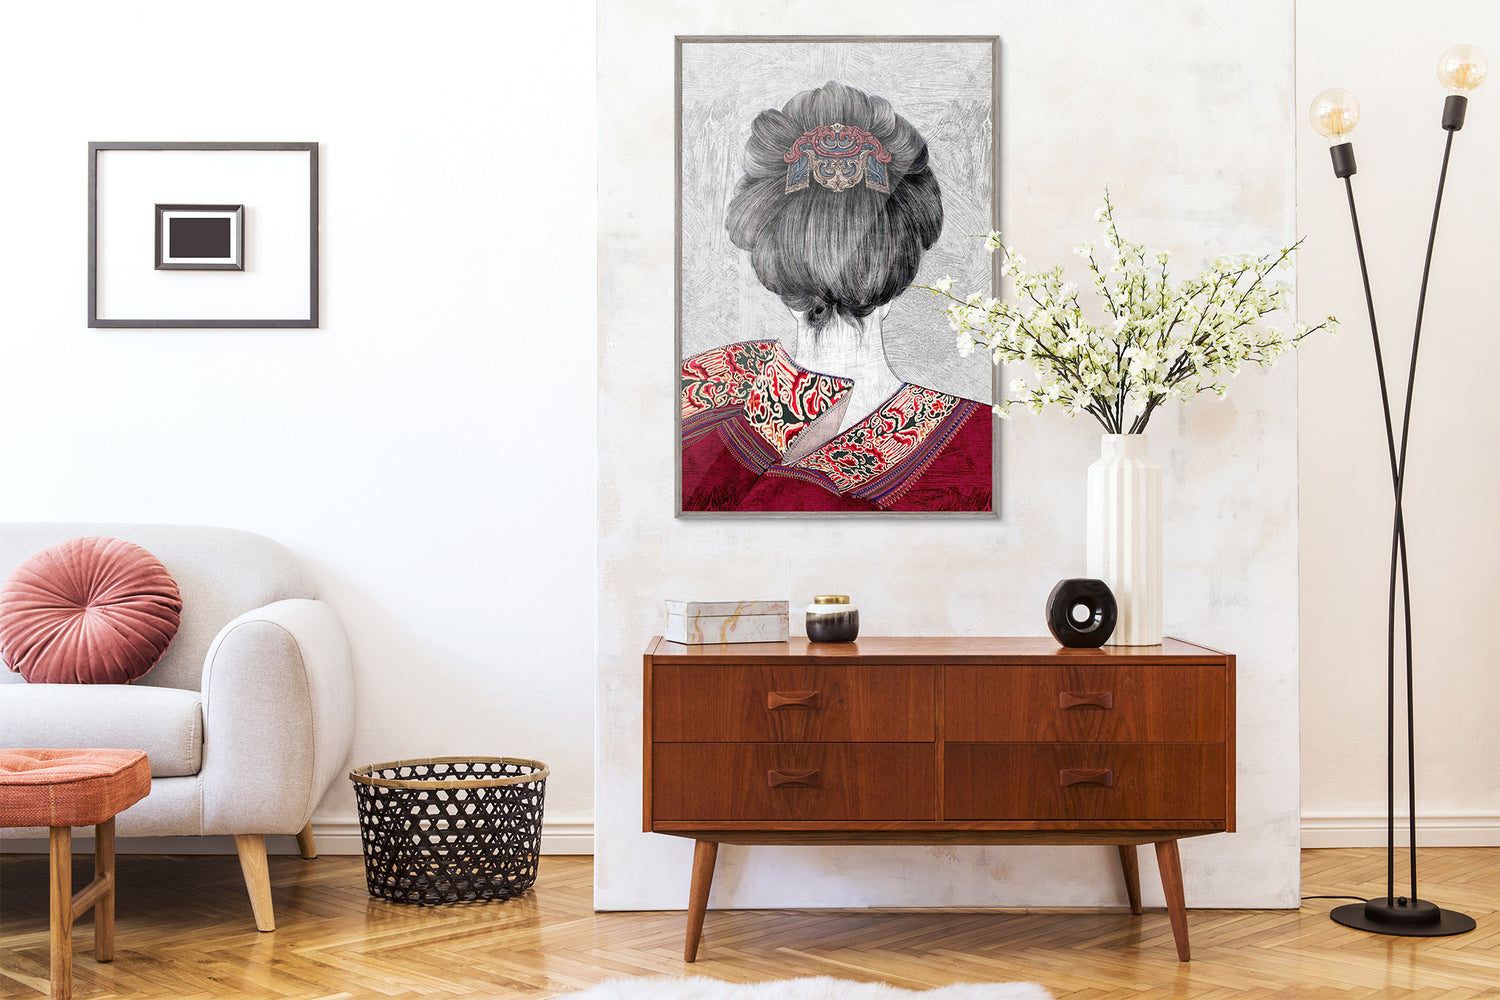 An framed embroidery art work embroidered with the back of a female figure is hung on the wall above the side table, with elegant milky white artificial cherry blossoms, which makes the whole living room very artistic.